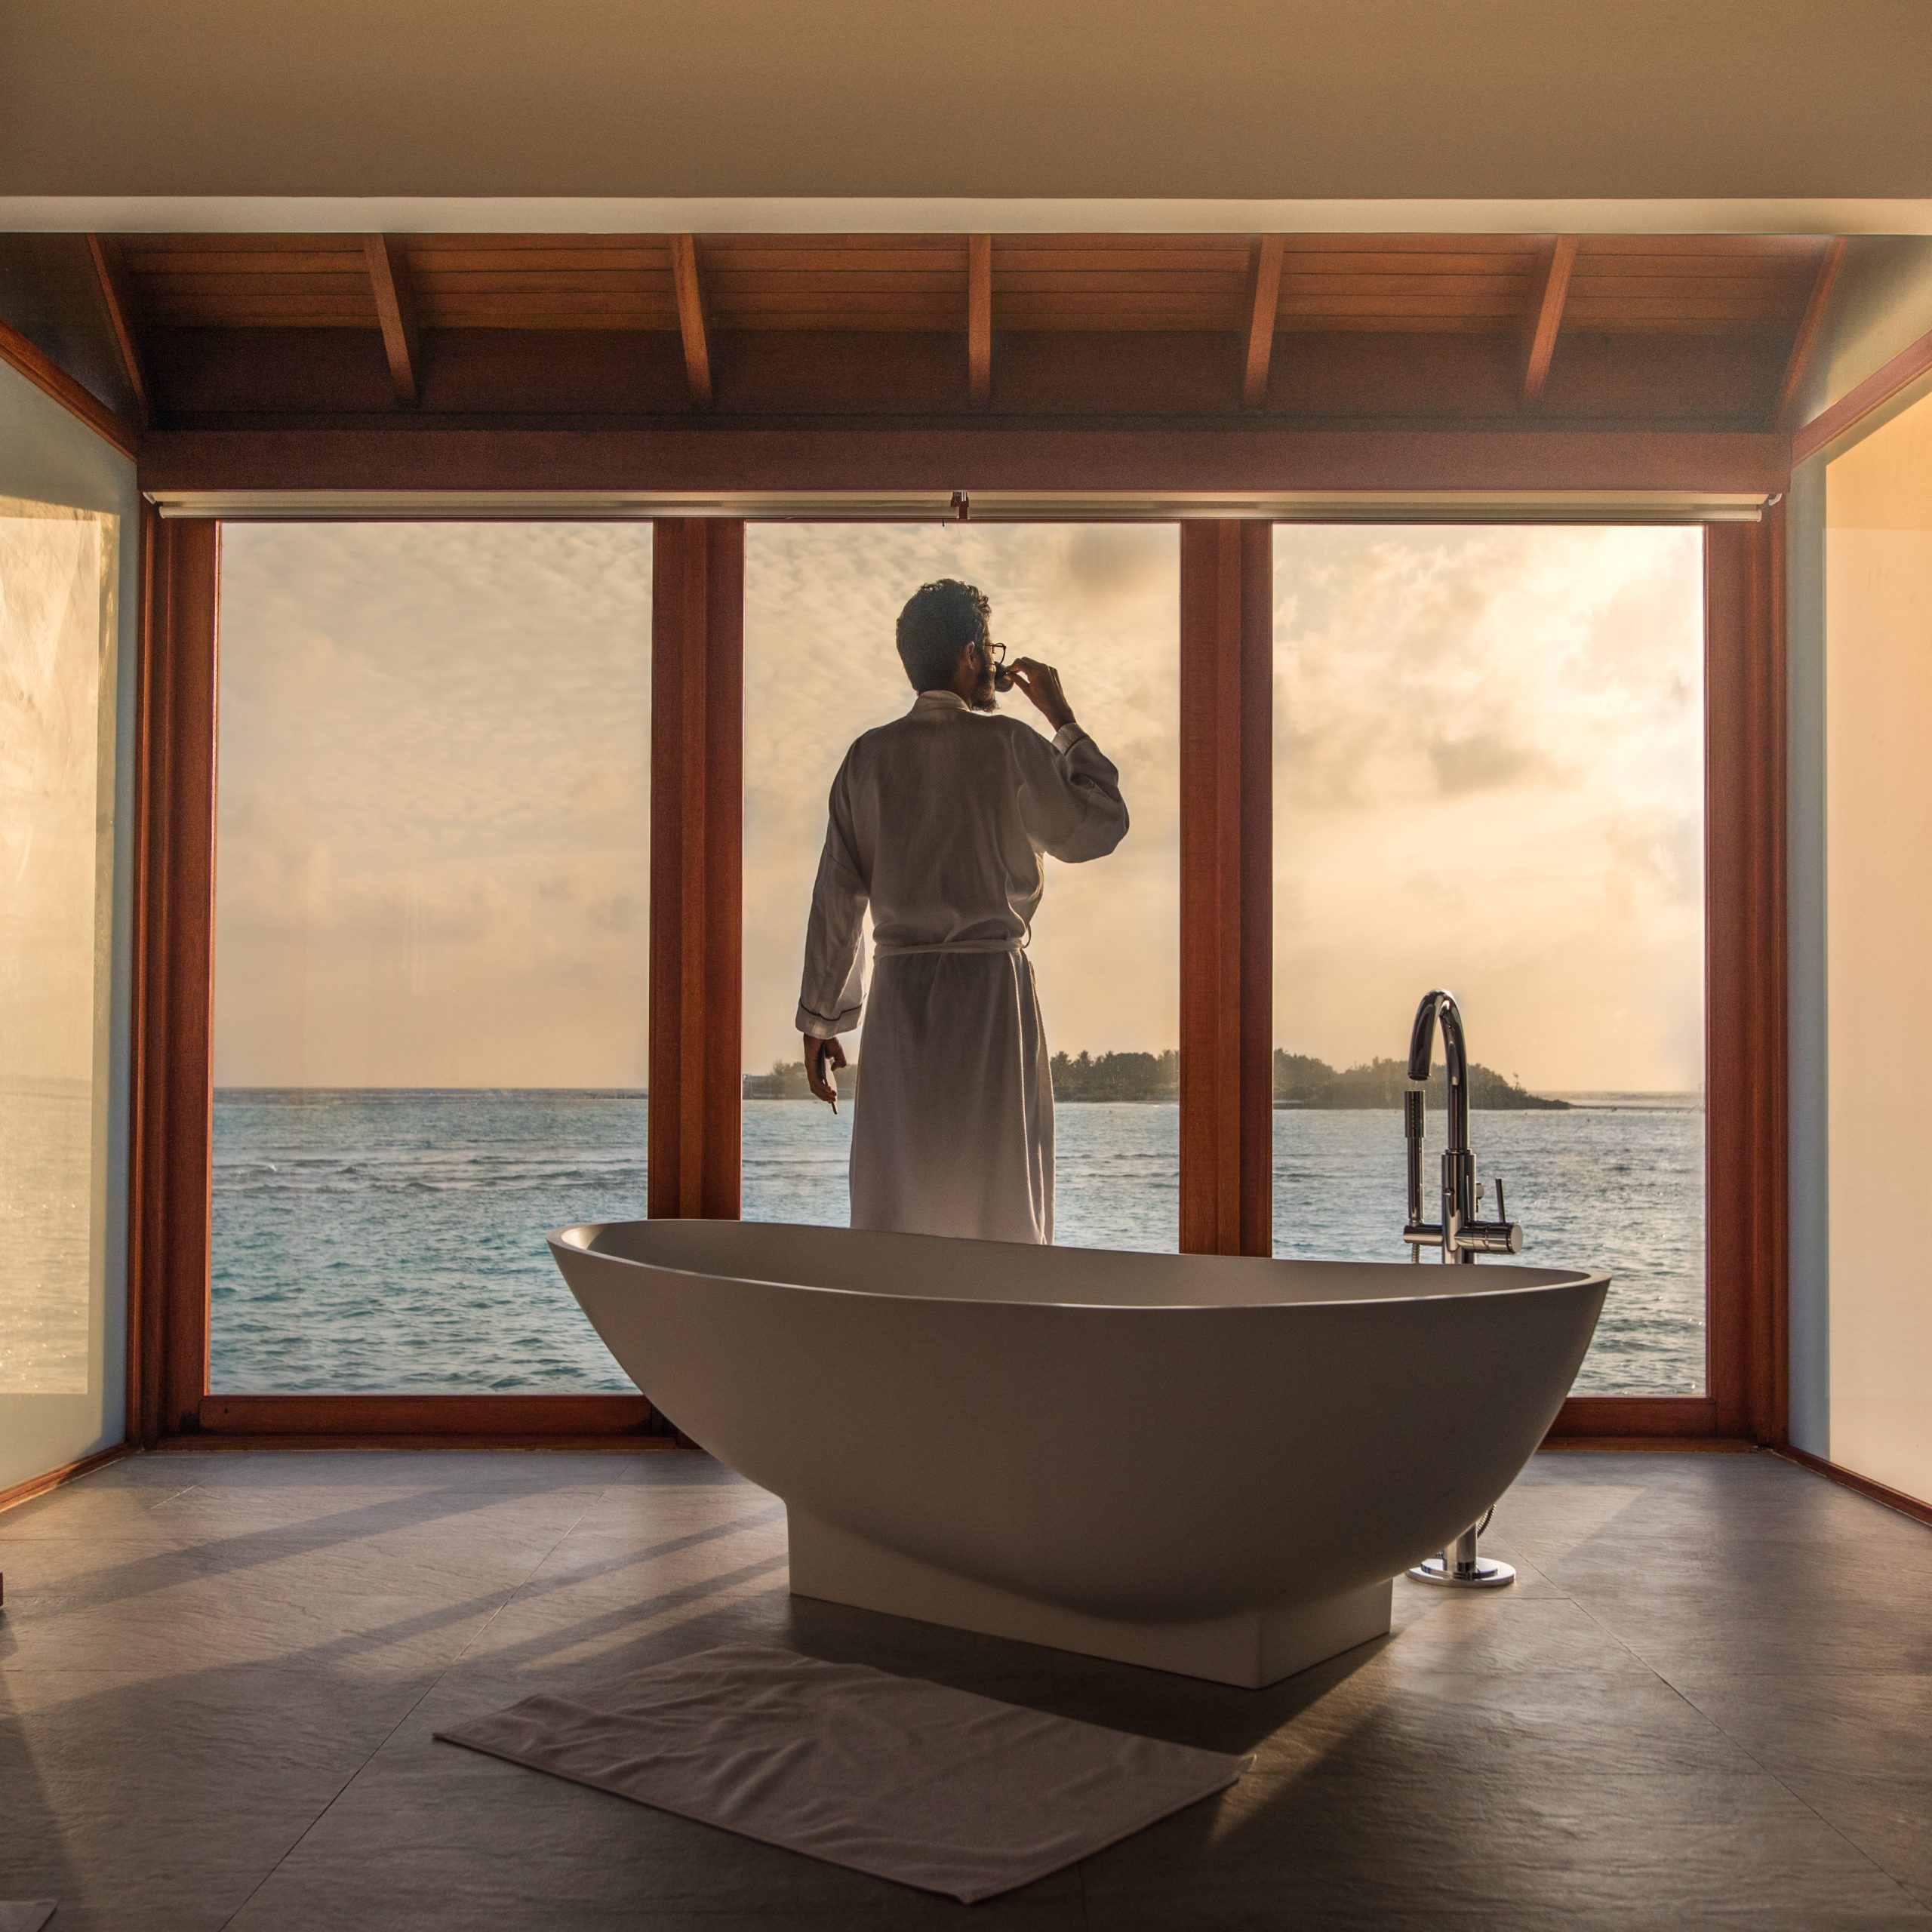 Man stands beside modern bathtub looking out the window at a body of water